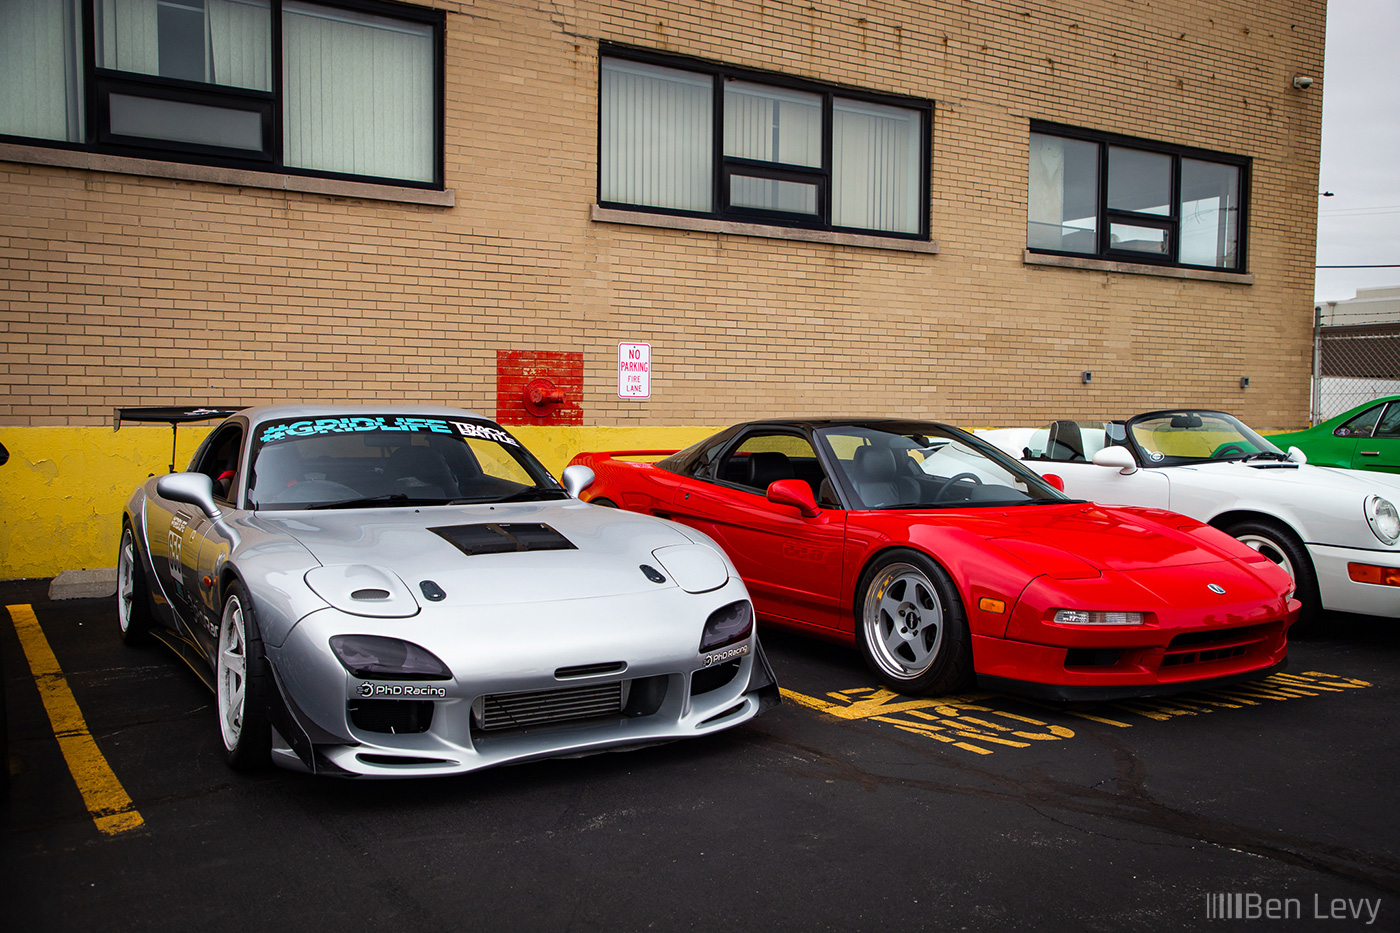 Silver RX-7 and Red NSX